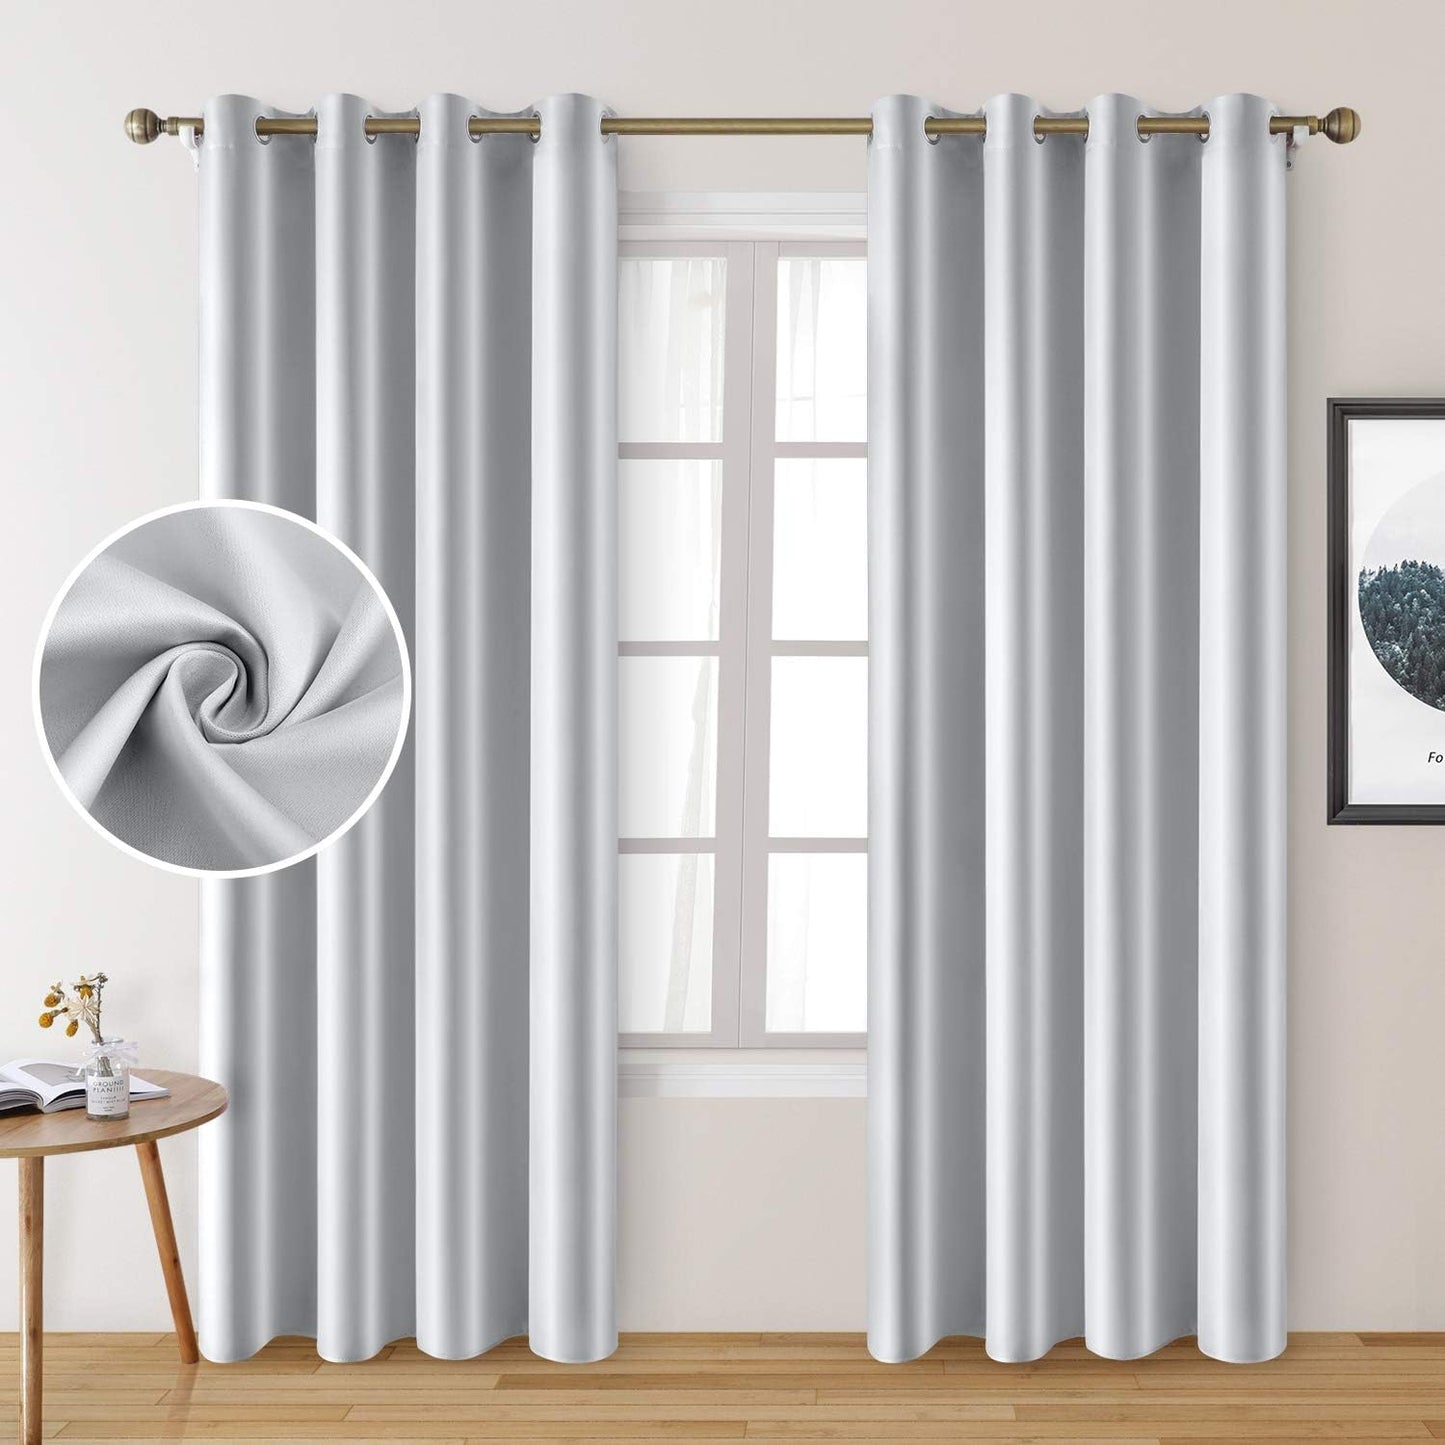 HOMEIDEAS Gold Blackout Curtains, Faux Silk for Bedroom 52 X 84 Inch Room Darkening Satin Thermal Insulated Drapes for Window, Indoor, Living Room, 2 Panels  HOMEIDEAS Greyish White 52" X 84" 